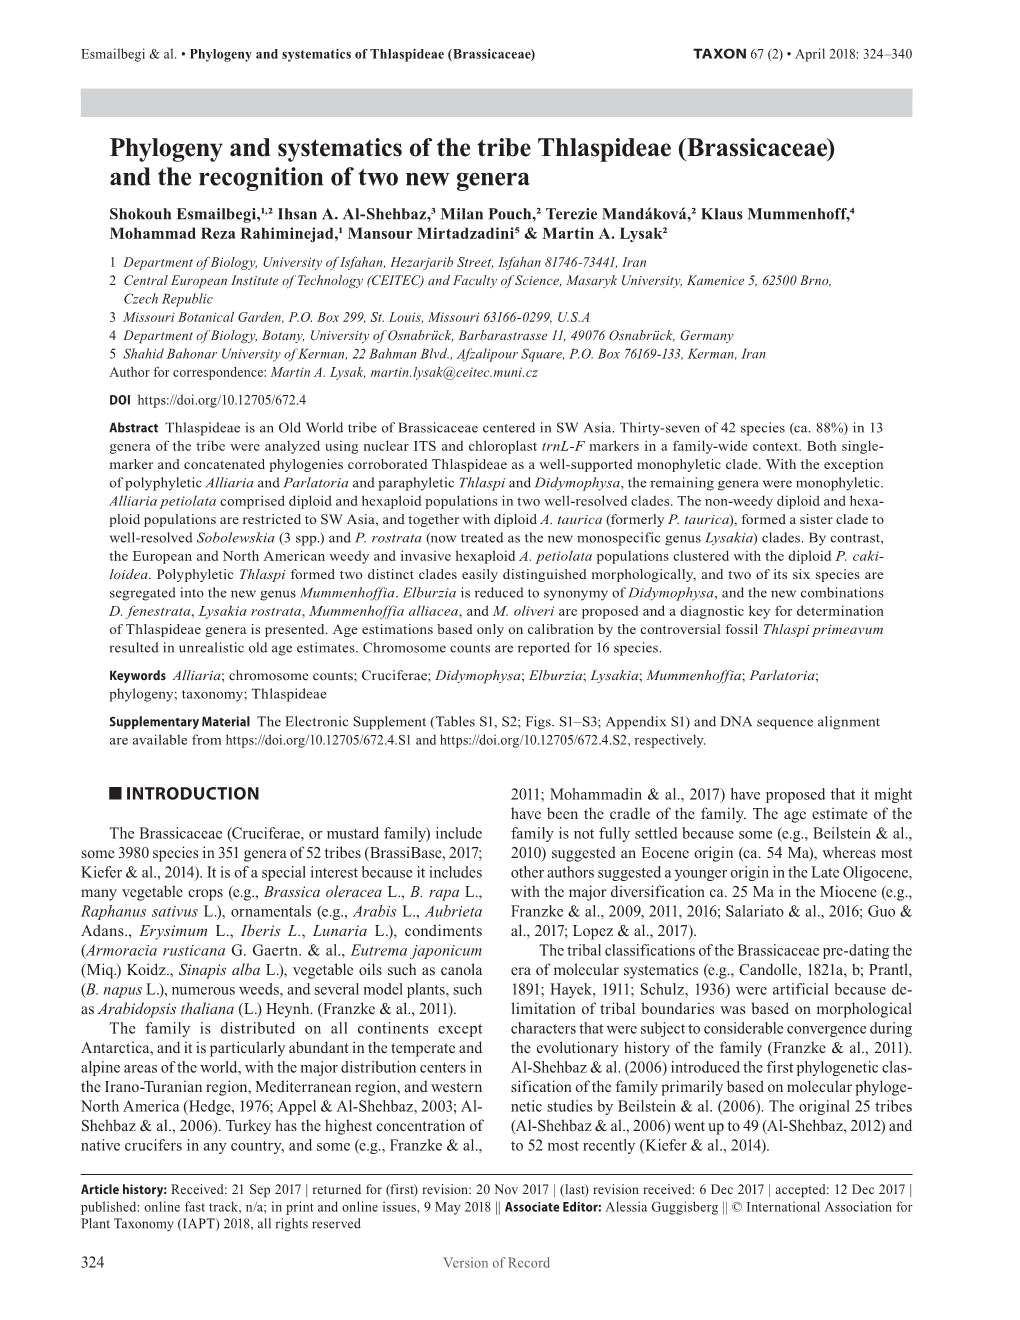 Phylogeny and Systematics of the Tribe Thlaspideae (Brassicaceae) and the Recognition of Two New Genera Shokouh Esmailbegi,1,2 Ihsan A